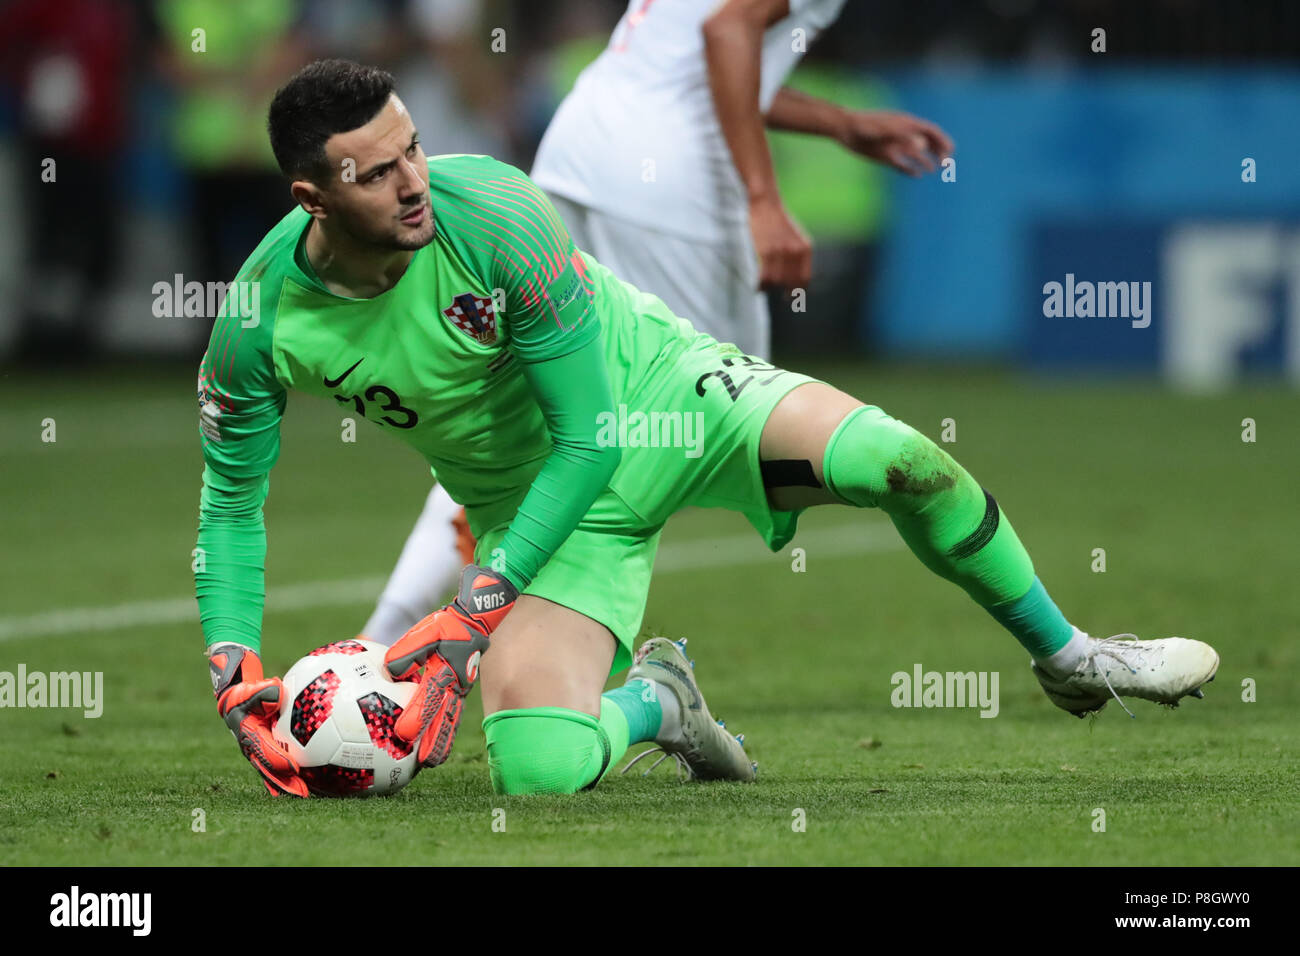 MOSCOW, RUSSIA - JULY 11: Danijel Subasic of Croatia in action during the 2018 FIFA World Cup Russia Semi Final match between England and Croatia at Luzhniki Stadium on July 11, 2018 in Moscow, Russia. MB Media Stock Photo